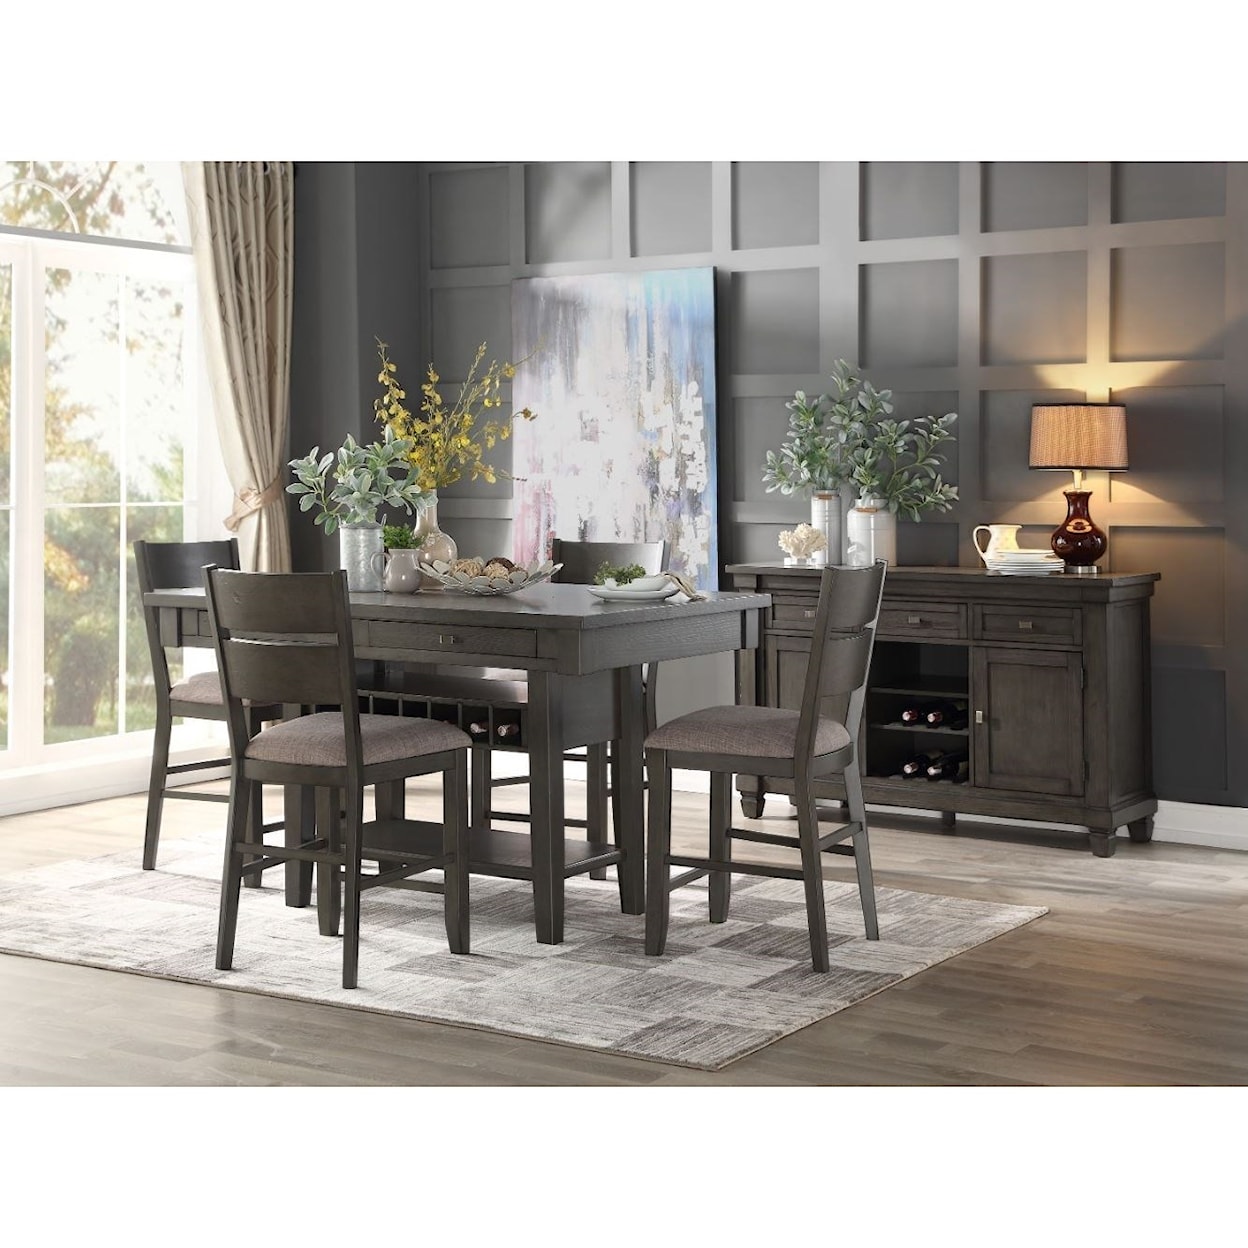 Homelegance Baresford Casual Dining Room Group